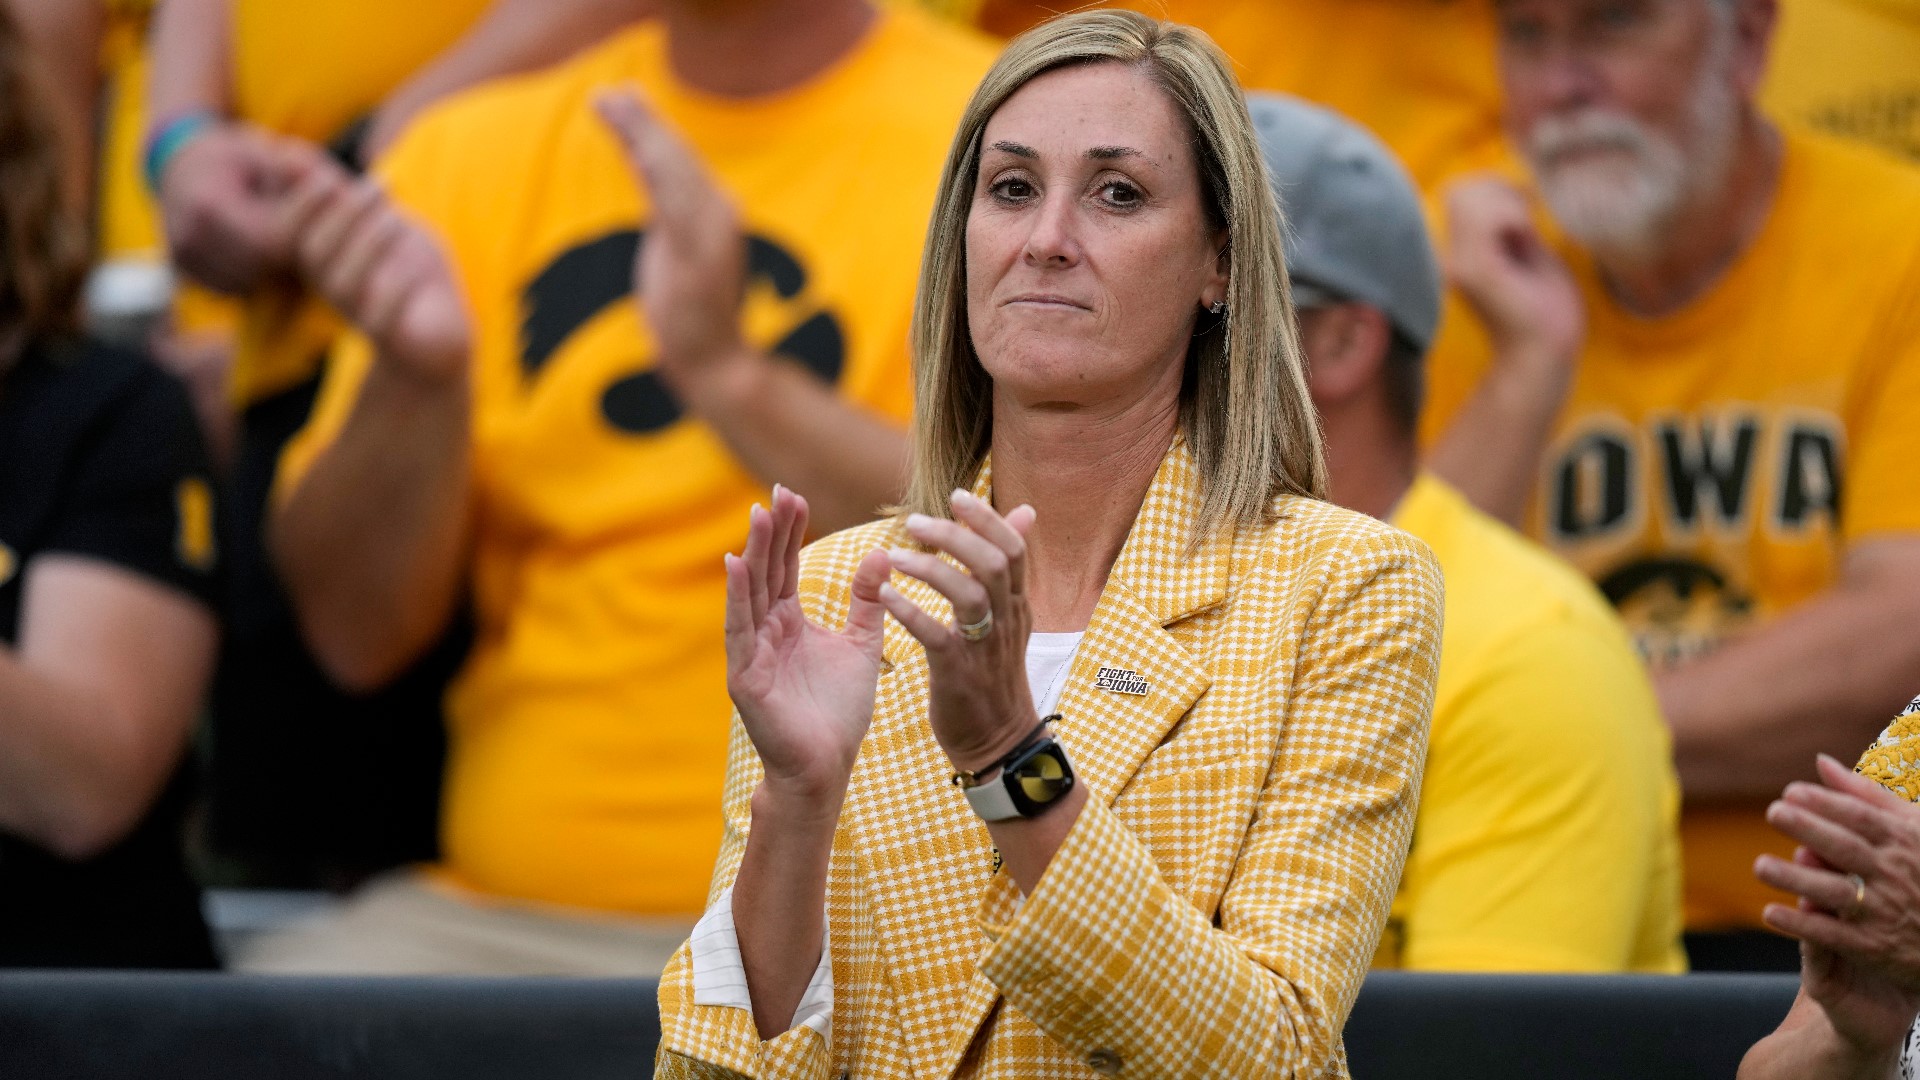 Beth Goetz has become Iowa's athletic director after serving in an interim role since August, the school announced Thursday.